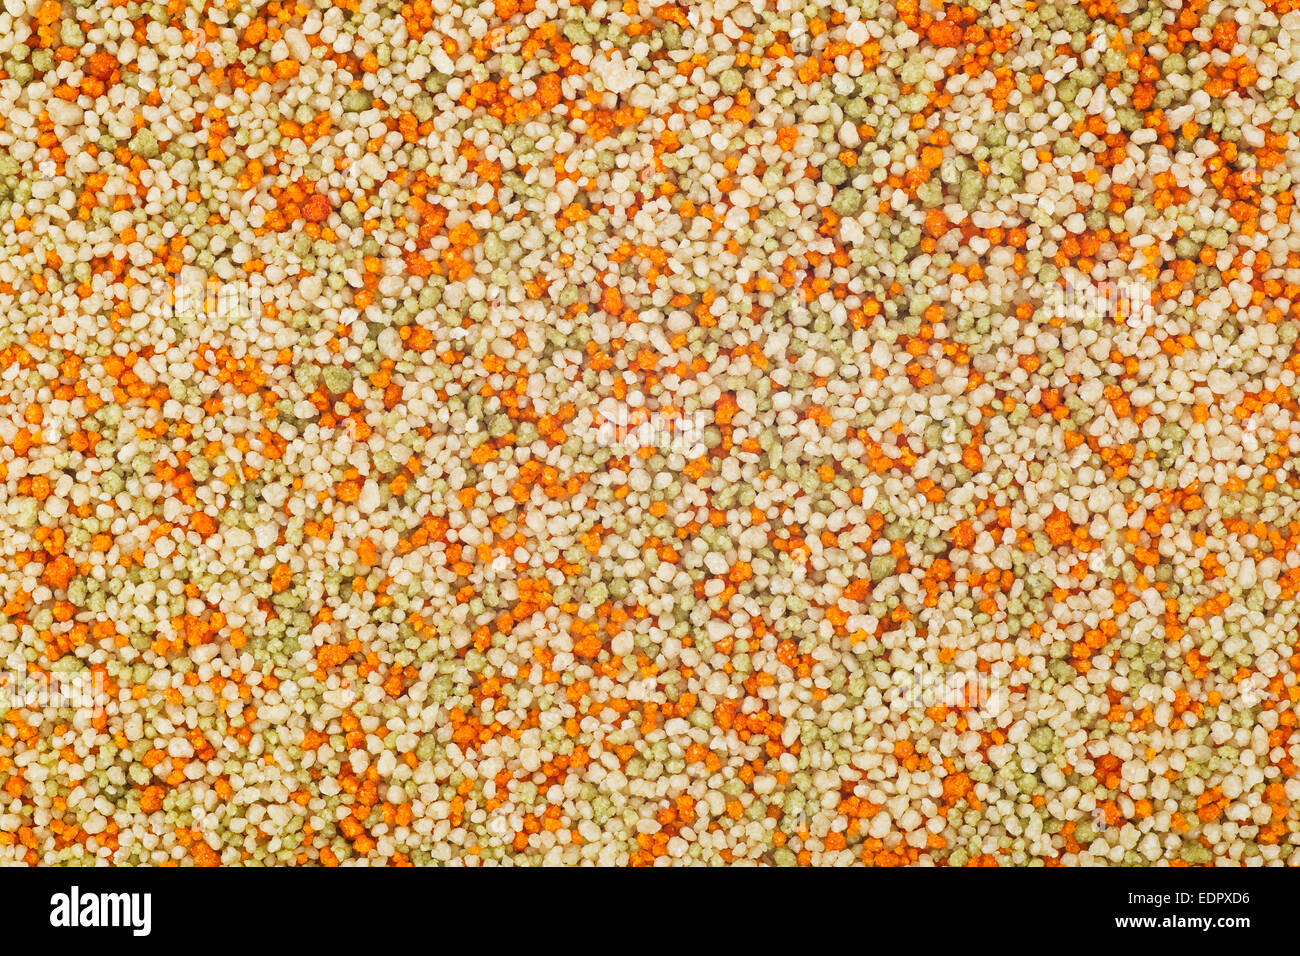 Tricolor couscous food texture or background, with tomato and spinach flavor Stock Photo